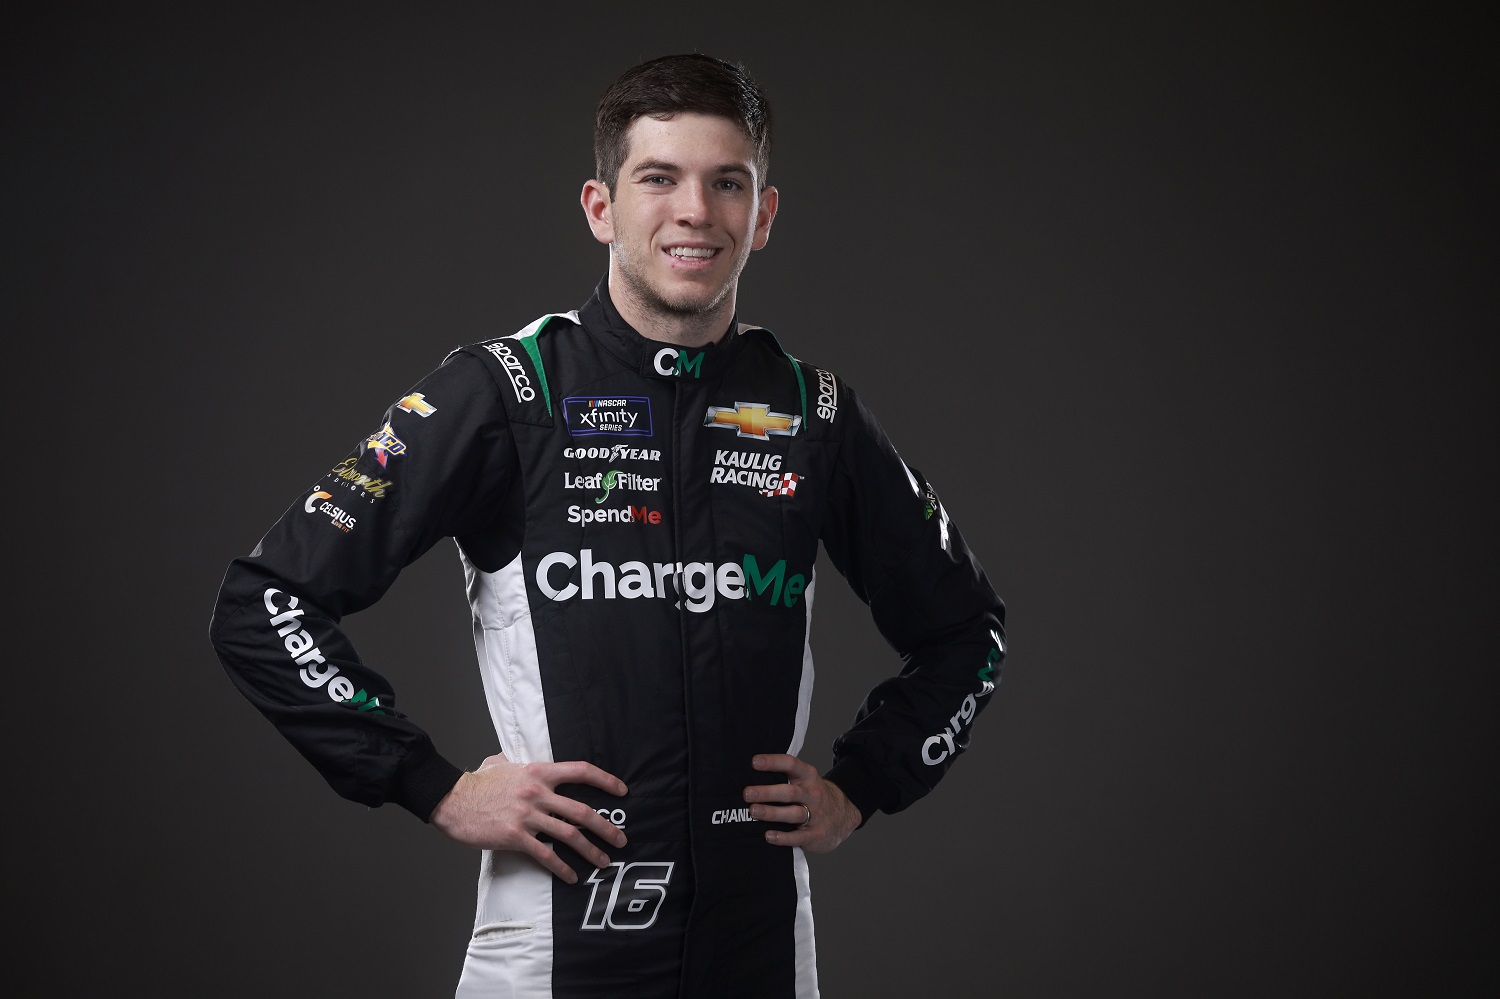 NASCAR driver Chandler Smith poses for a photo during NASCAR Production Days at Charlotte Convention Center on Jan. 18, 2023. | Jared C. Tilton/Getty Images